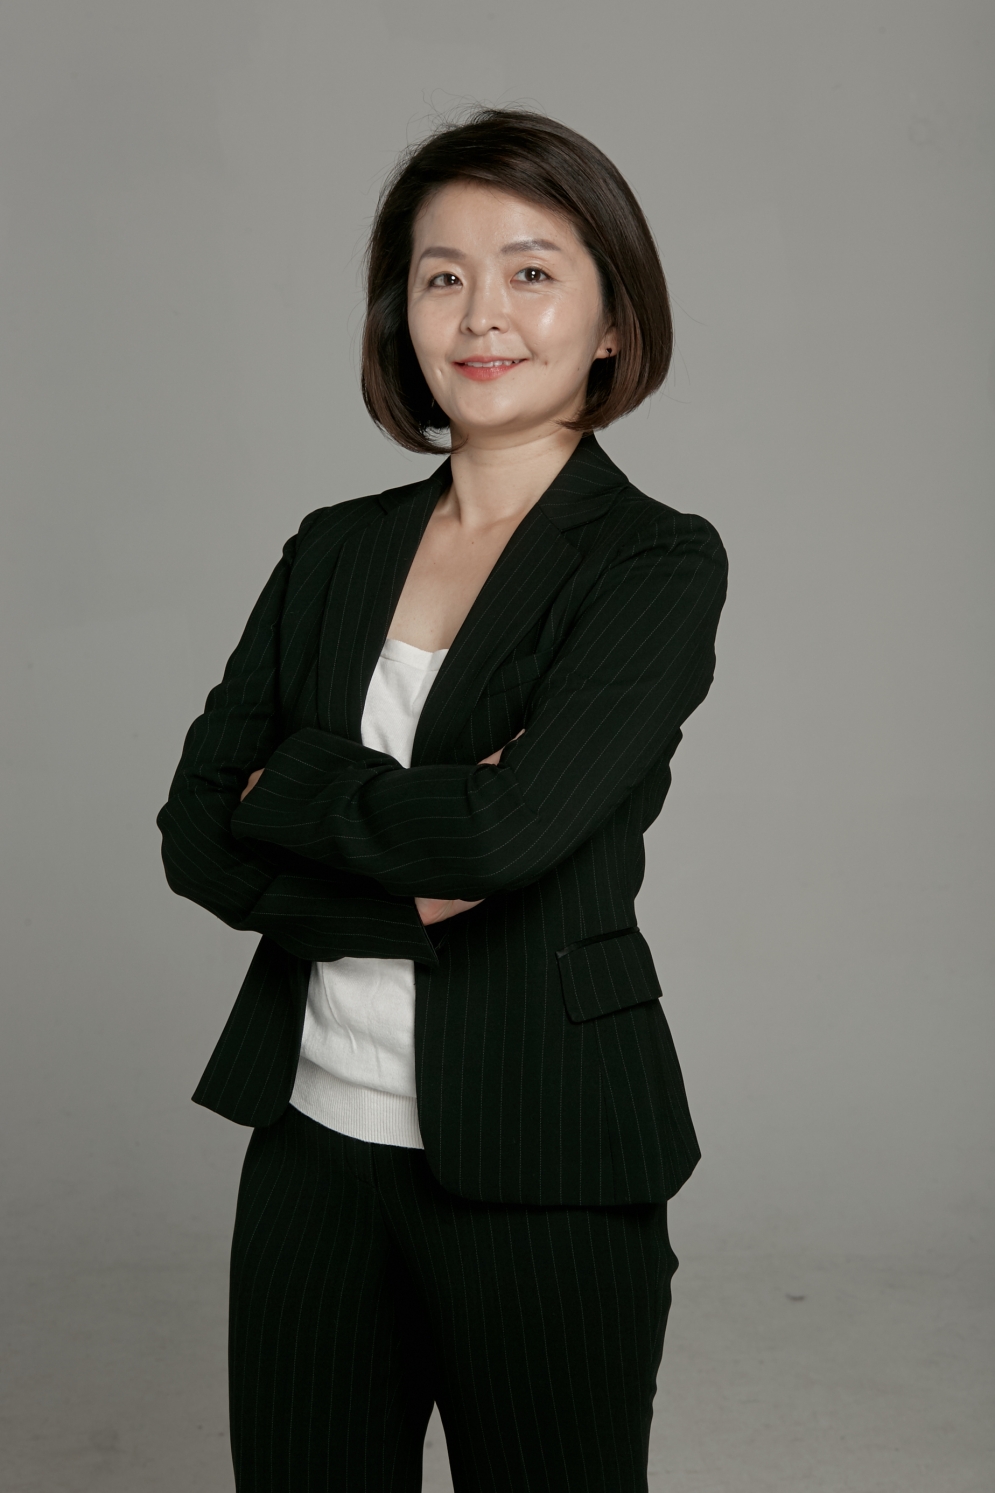 StradVision COO Sunny Lee is relocating to Michigan from South Korea, to lead the U.S. office, and has been appointed CEO of StradVision Technology USA